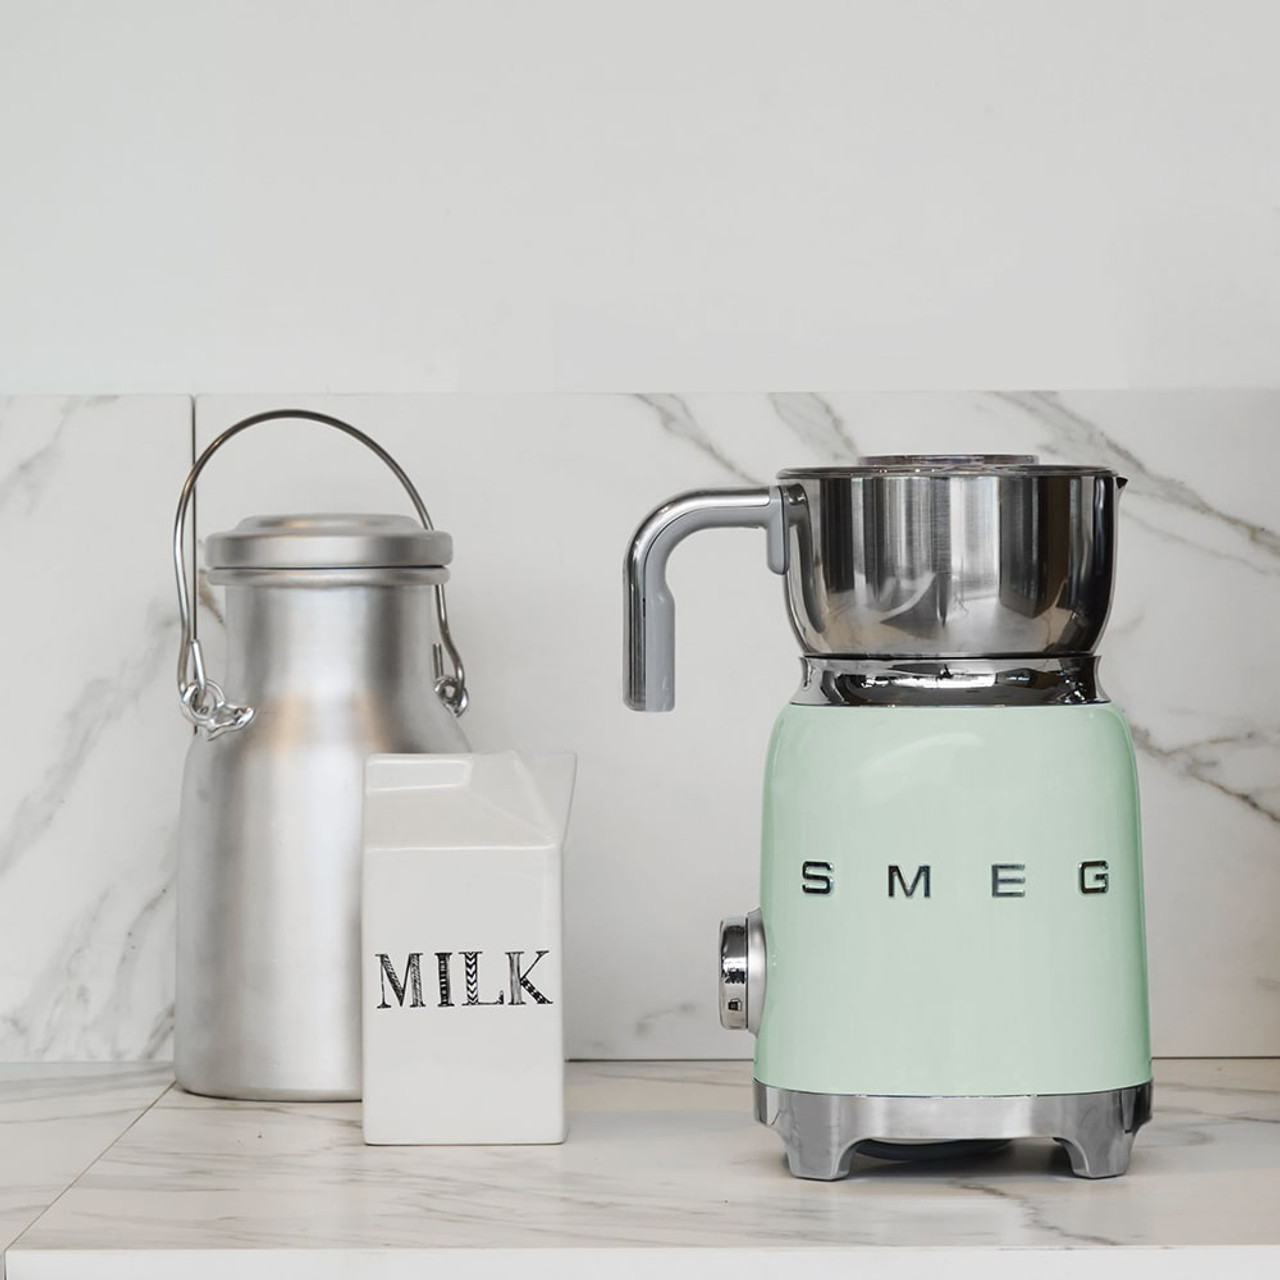 https://cdn11.bigcommerce.com/s-hccytny0od/images/stencil/1280x1280/products/3182/11298/smeg-milk-frother-1__91103.1584388084.jpg?c=2?imbypass=on